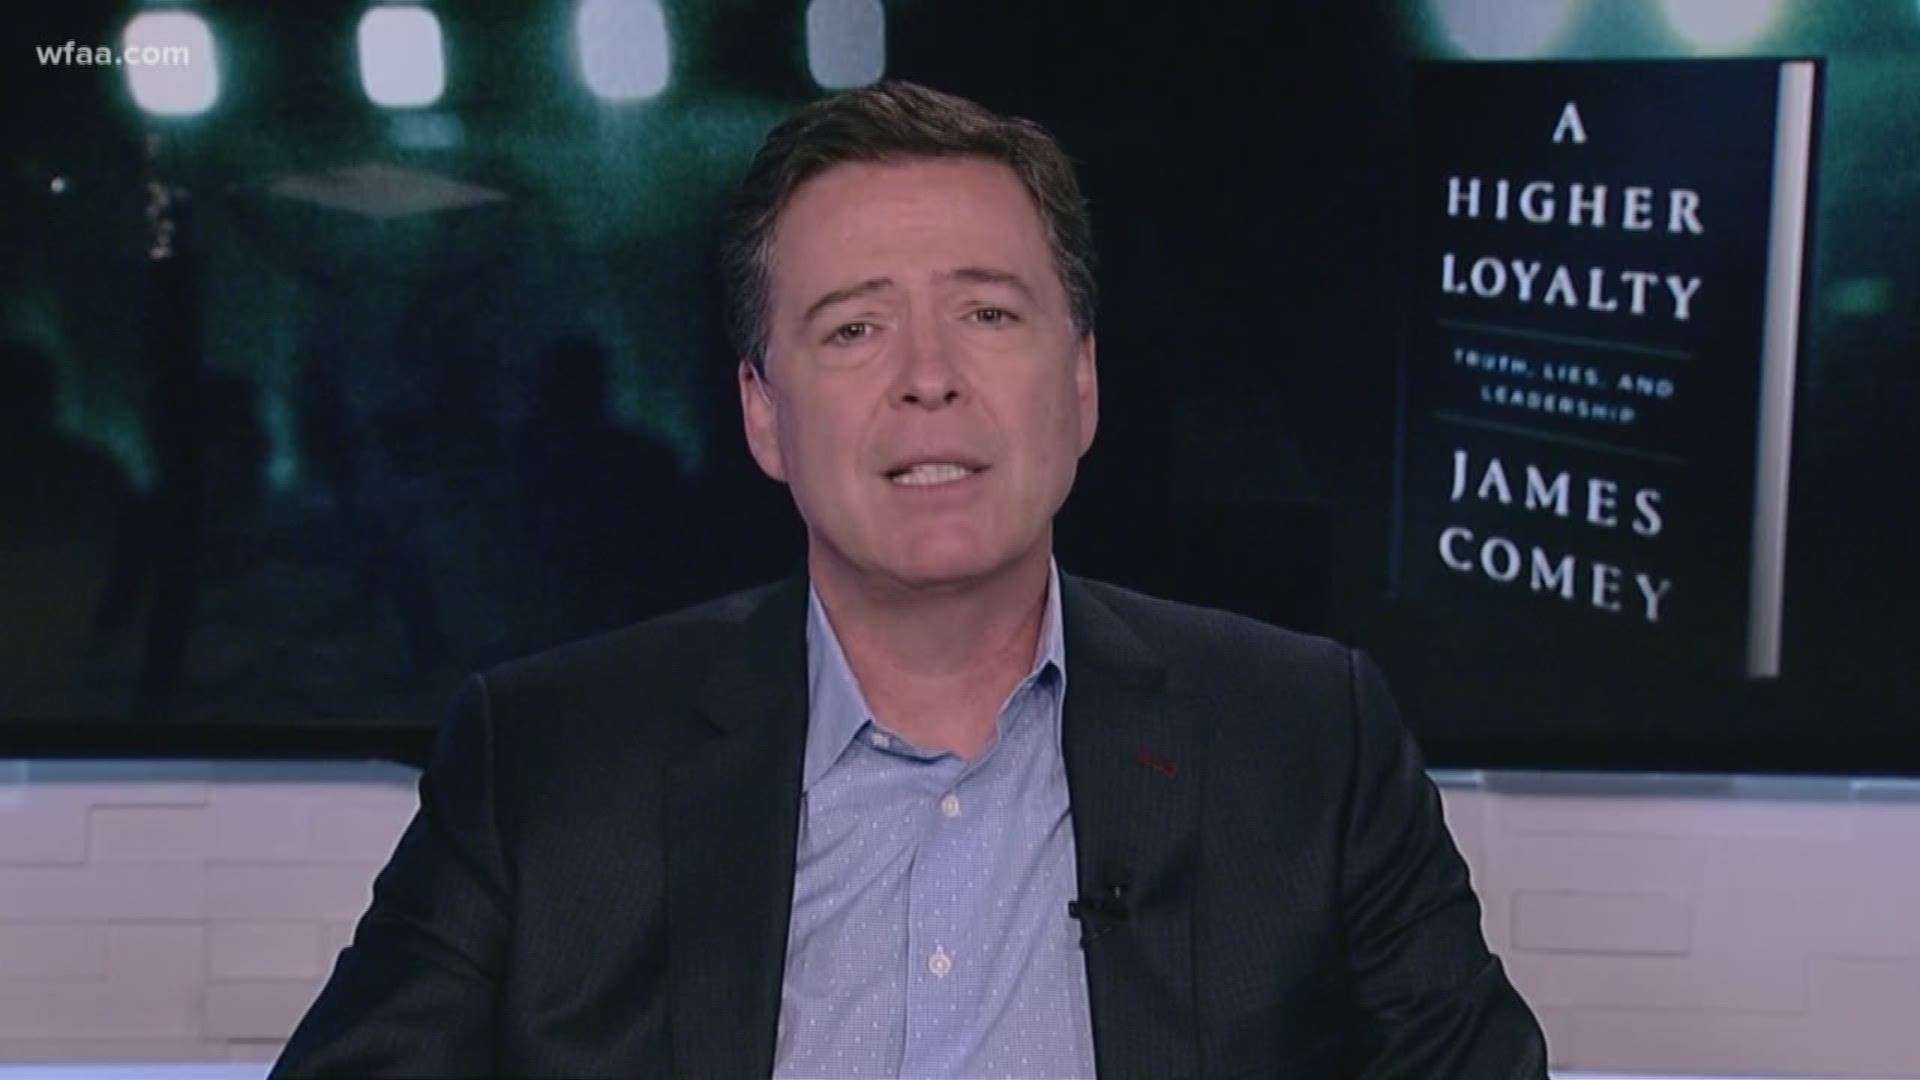 Comey gave an interview with WFAA ahead of the release of his new book.